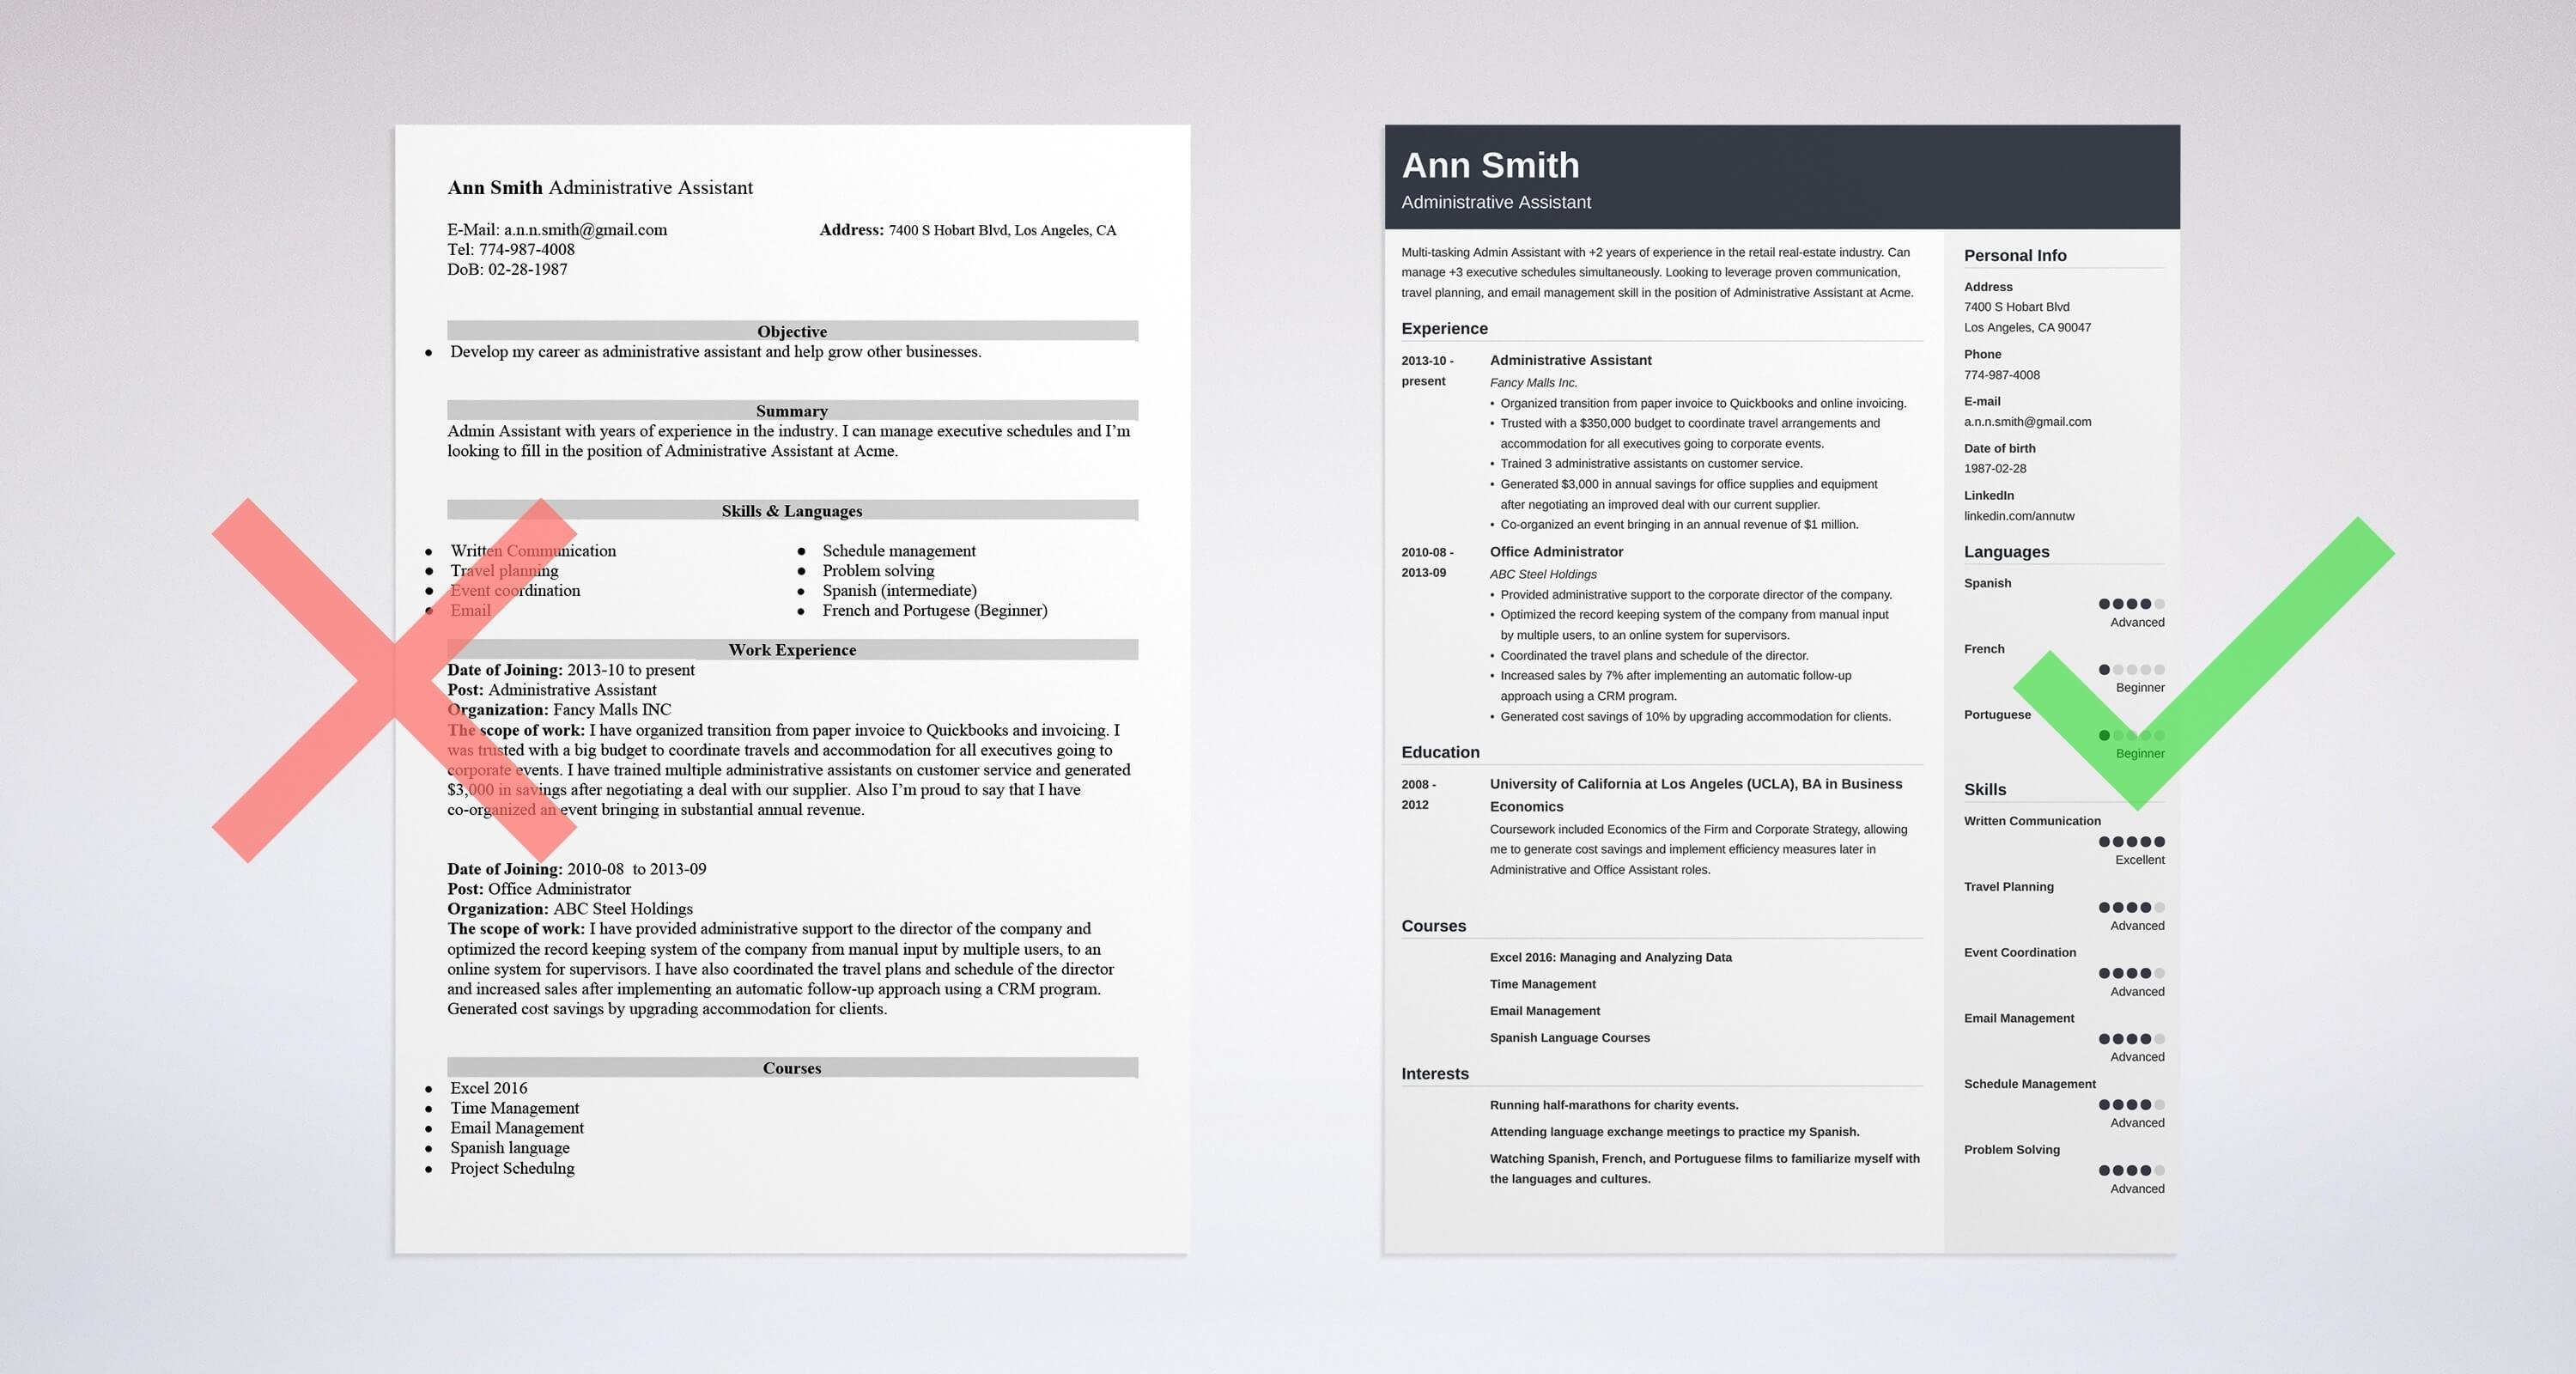 Administrative Assistant Resume Sample & Guide (20+ Examples)